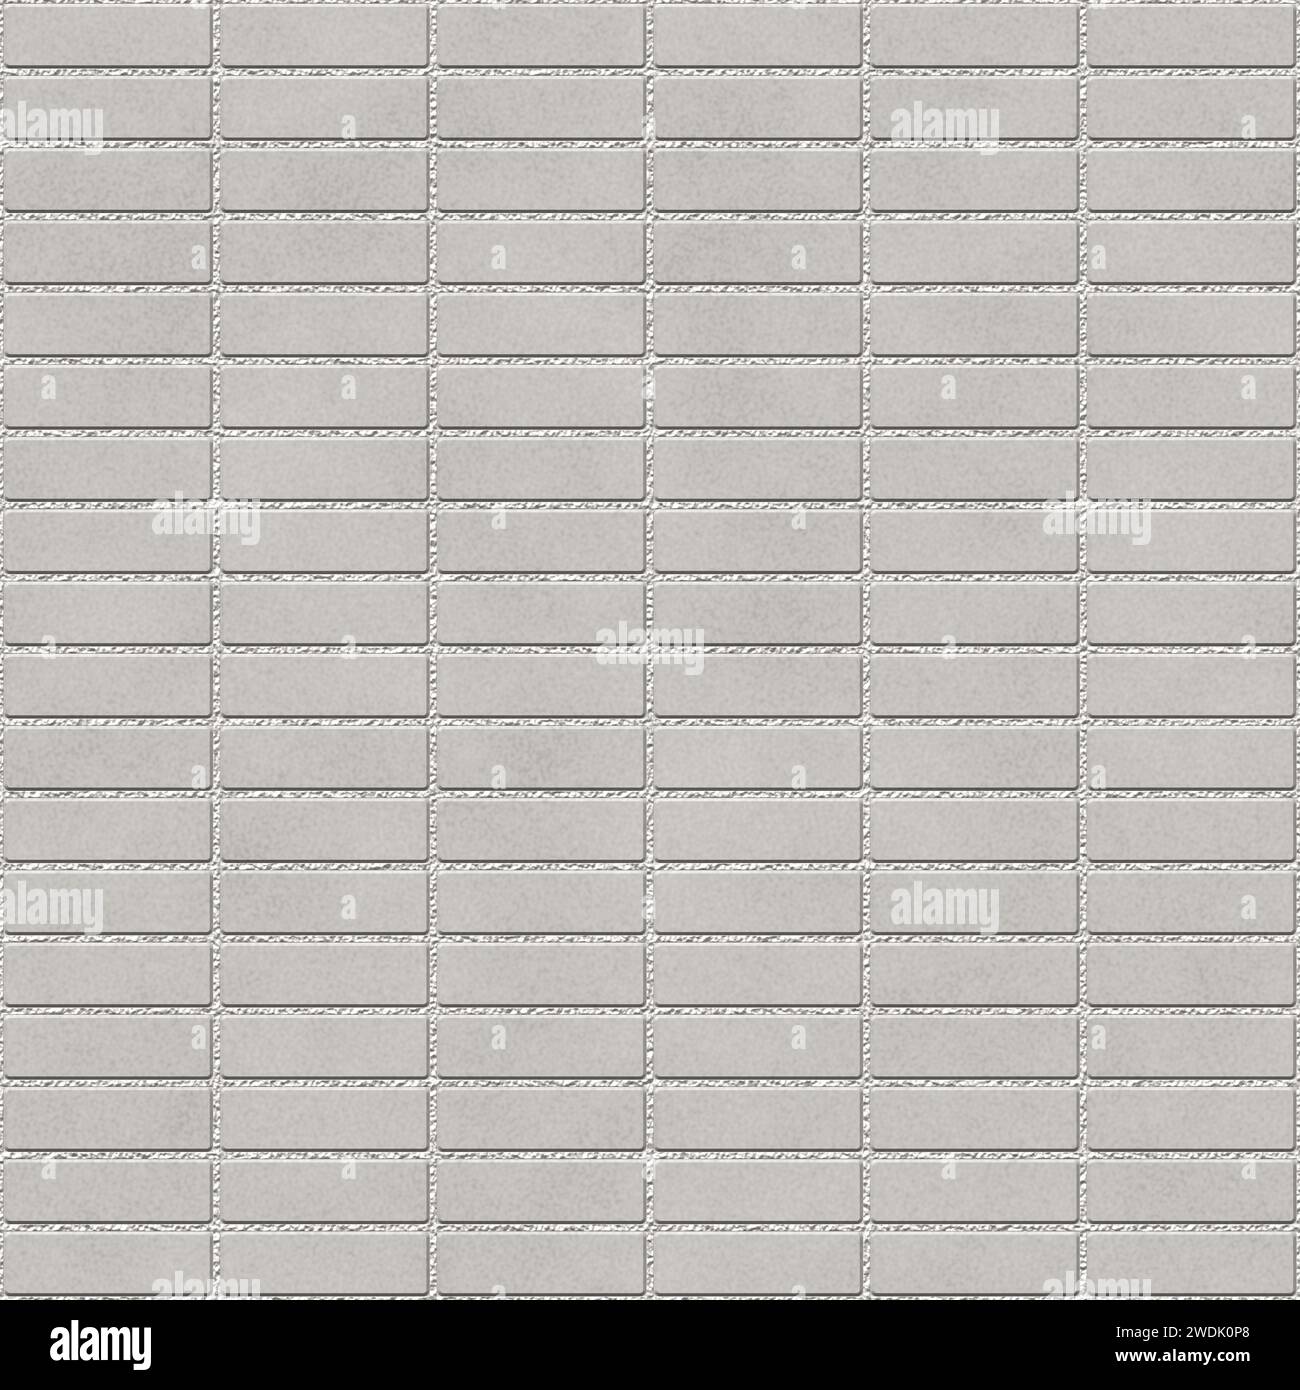 Brick drawing.  White brick wall seamless background- texture pattern for continuous replication. Brick pattern. Stock Photo